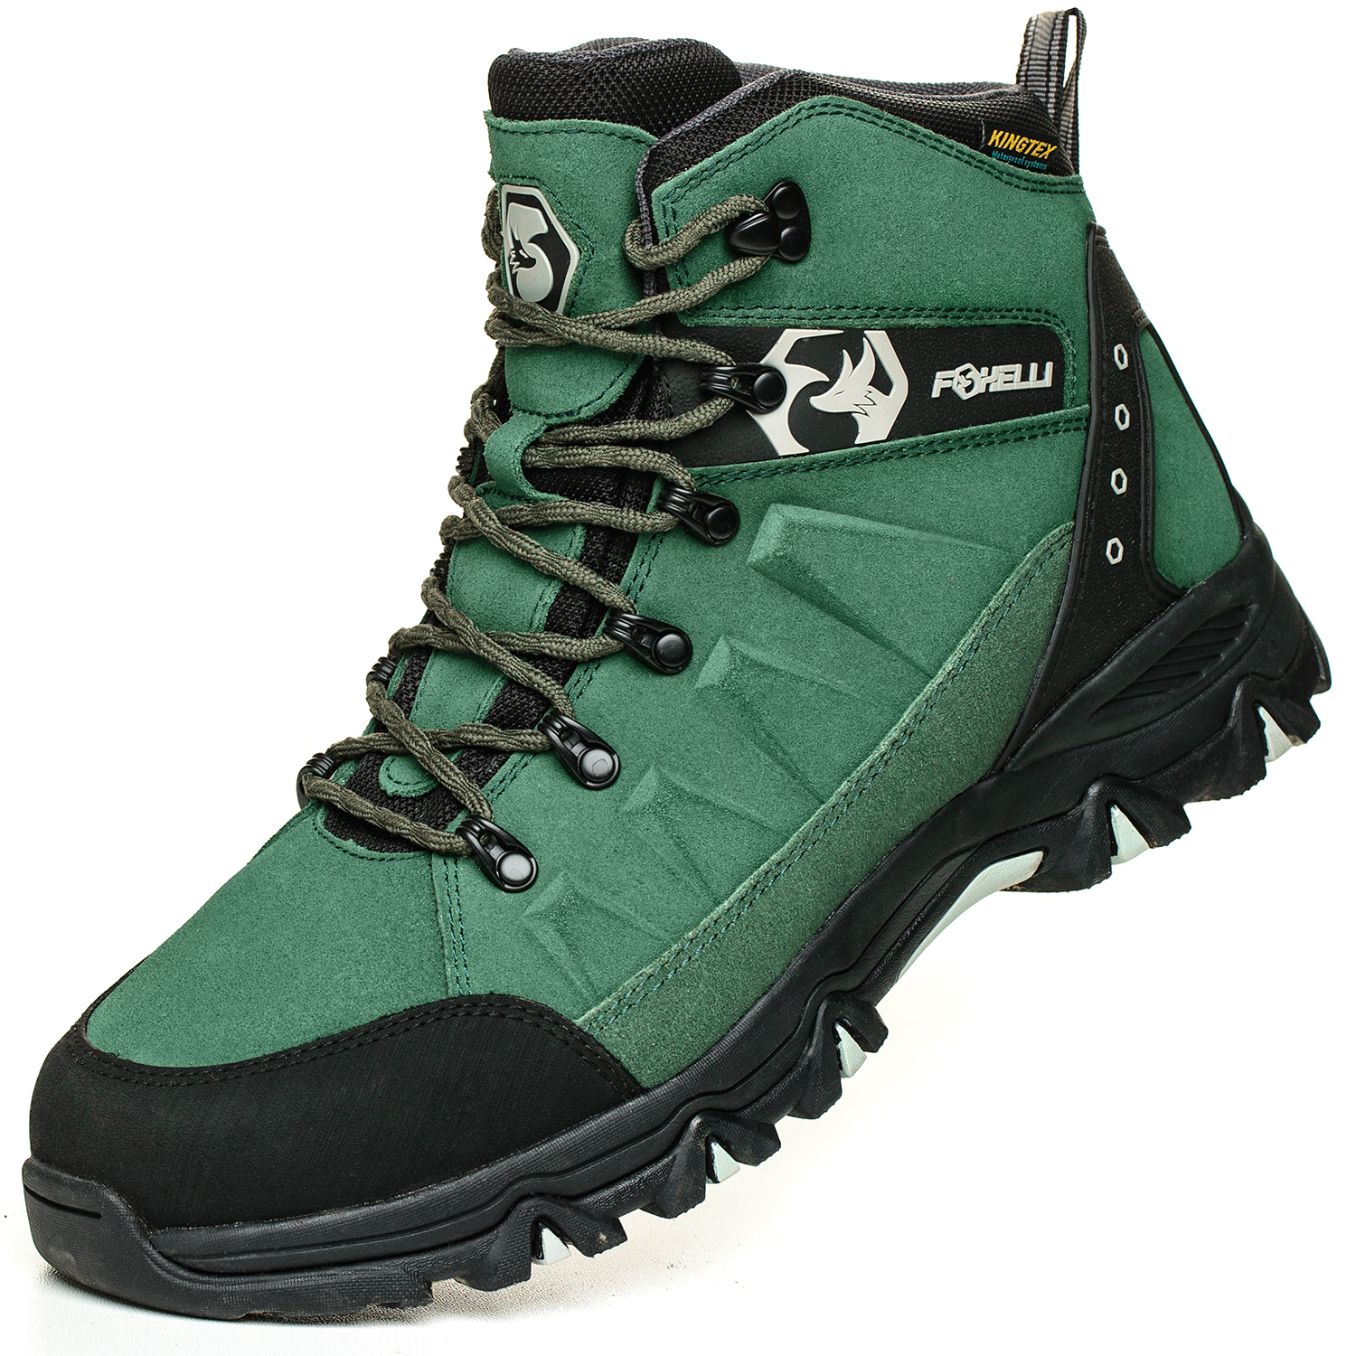 green hiking shoes